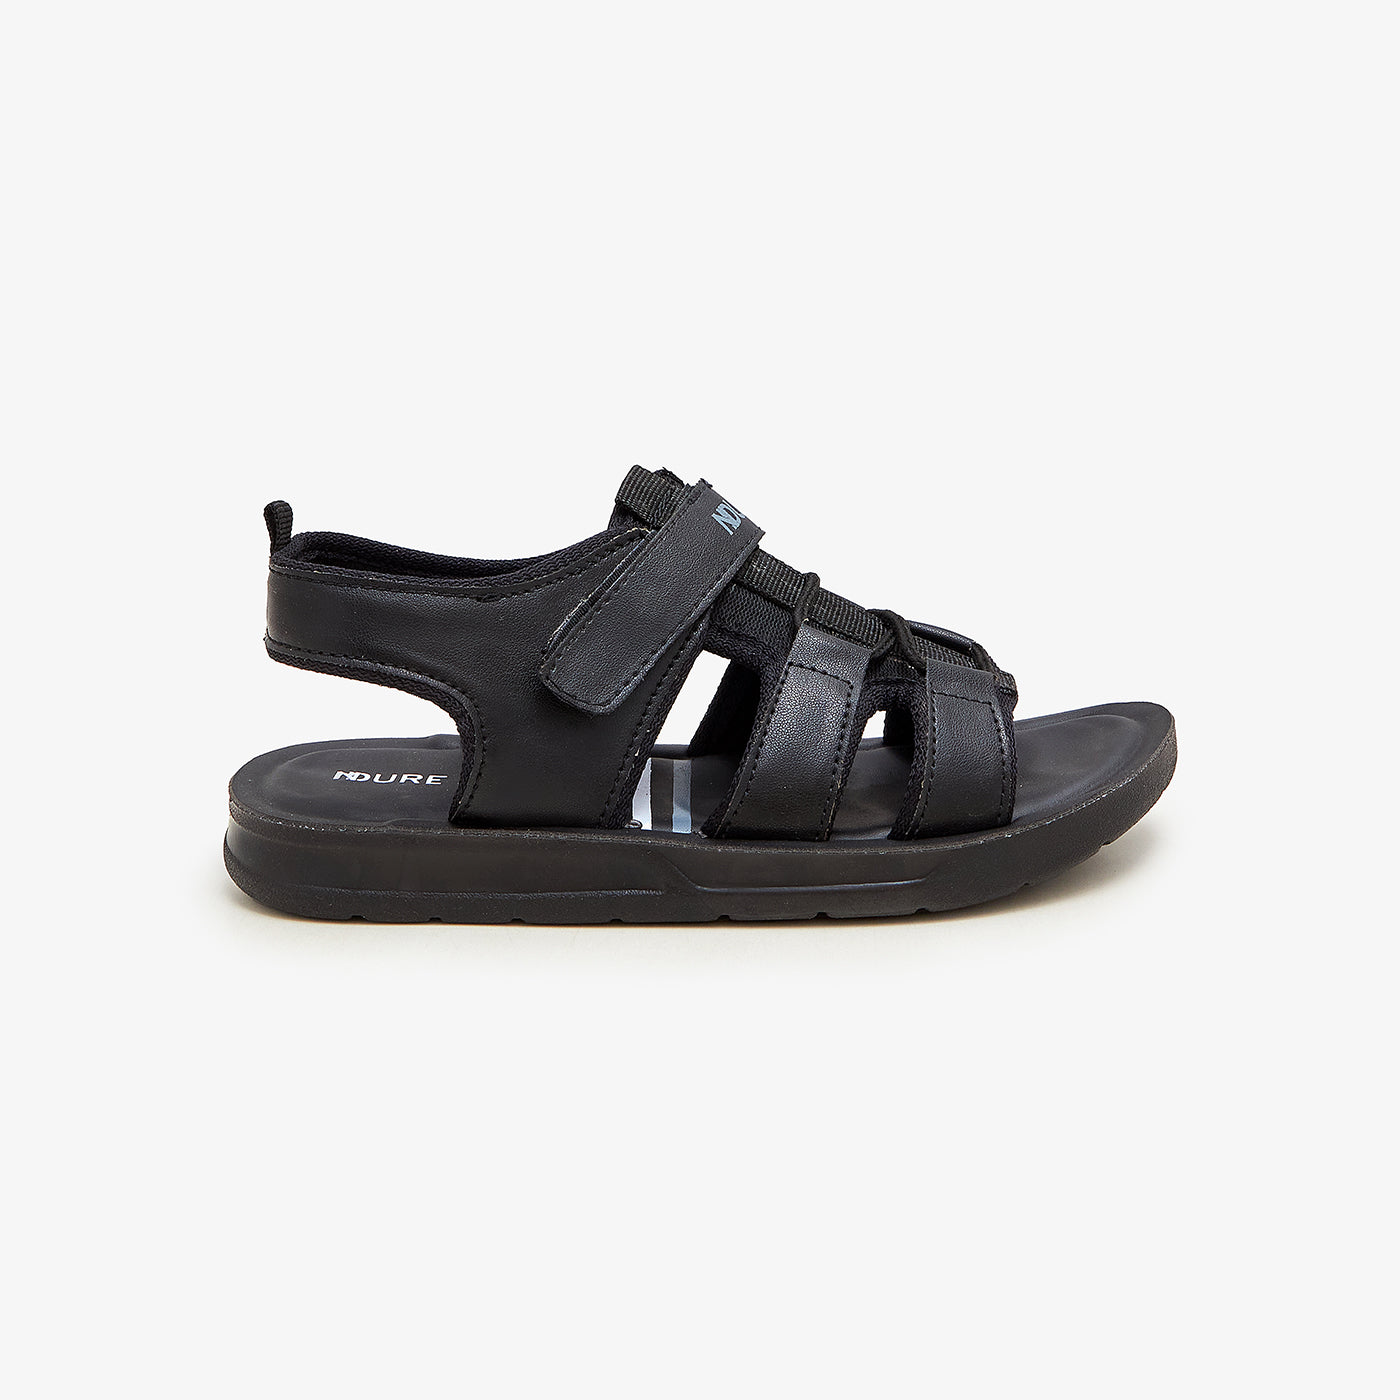 Outdoor Sandals for Boys